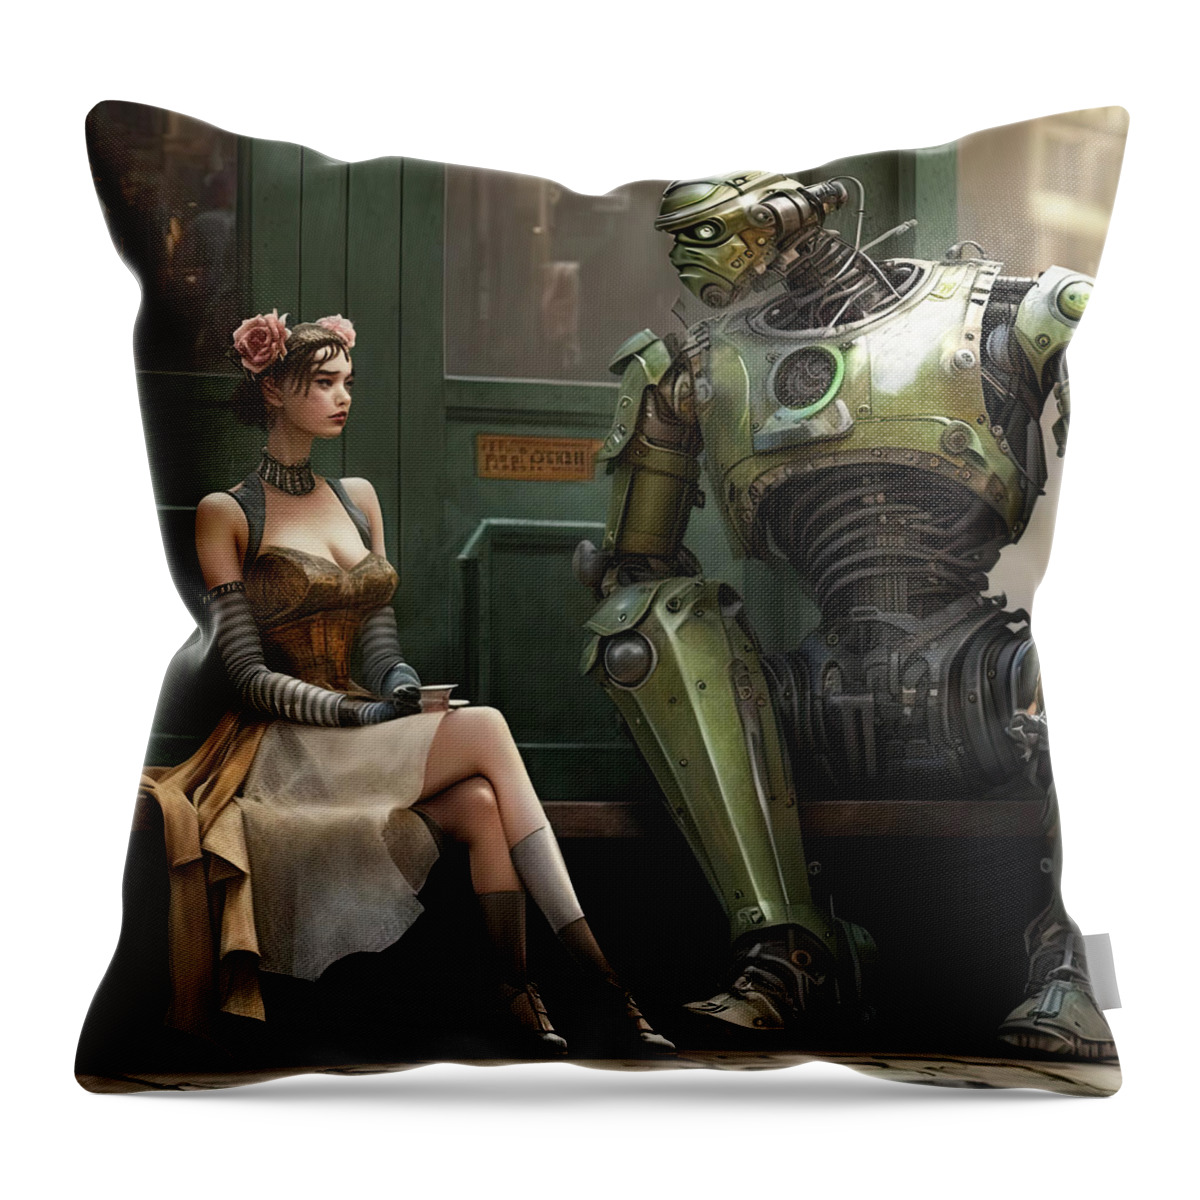 Woman Throw Pillow featuring the digital art Time Collapse No.7 by My Head Cinema